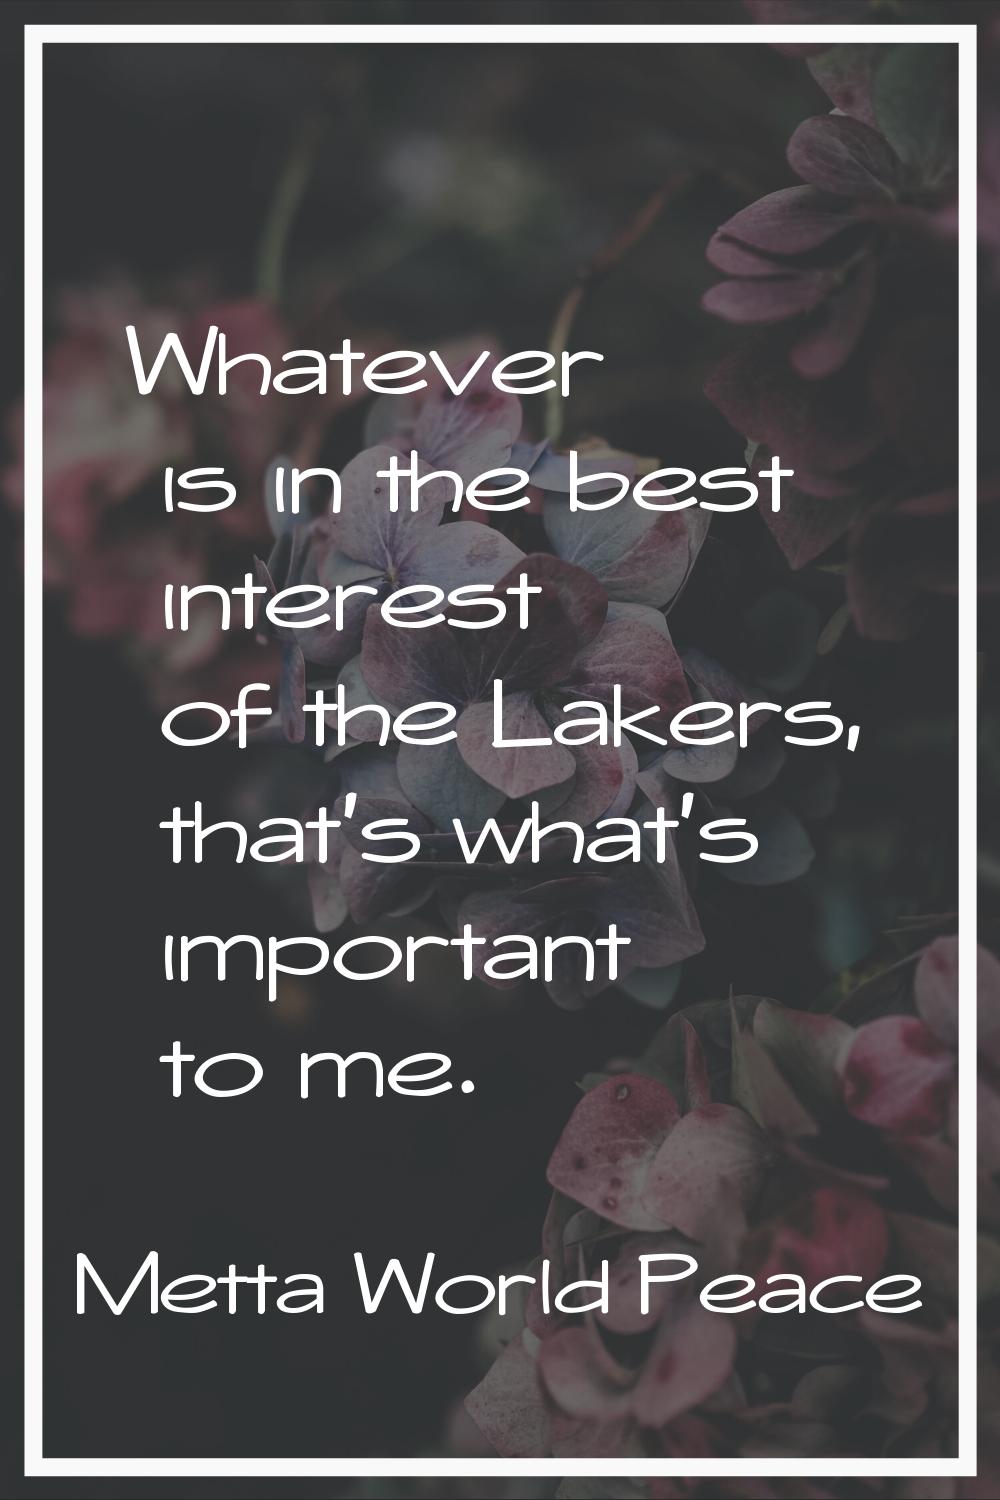 Whatever is in the best interest of the Lakers, that's what's important to me.